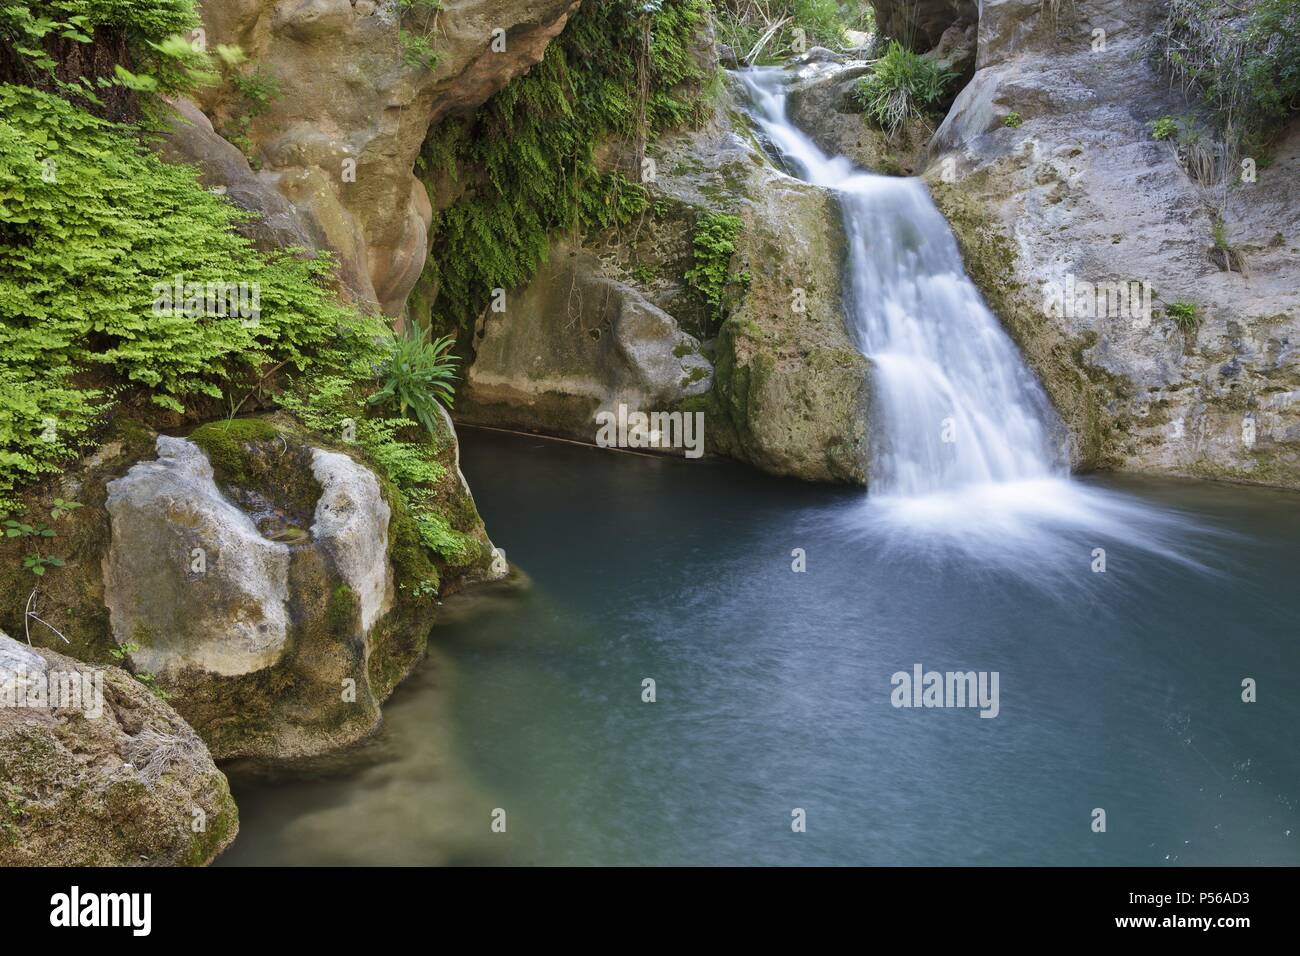 Foix River. Area of?? Natural Interest. Province of Barcelona. Spain. Stock Photo